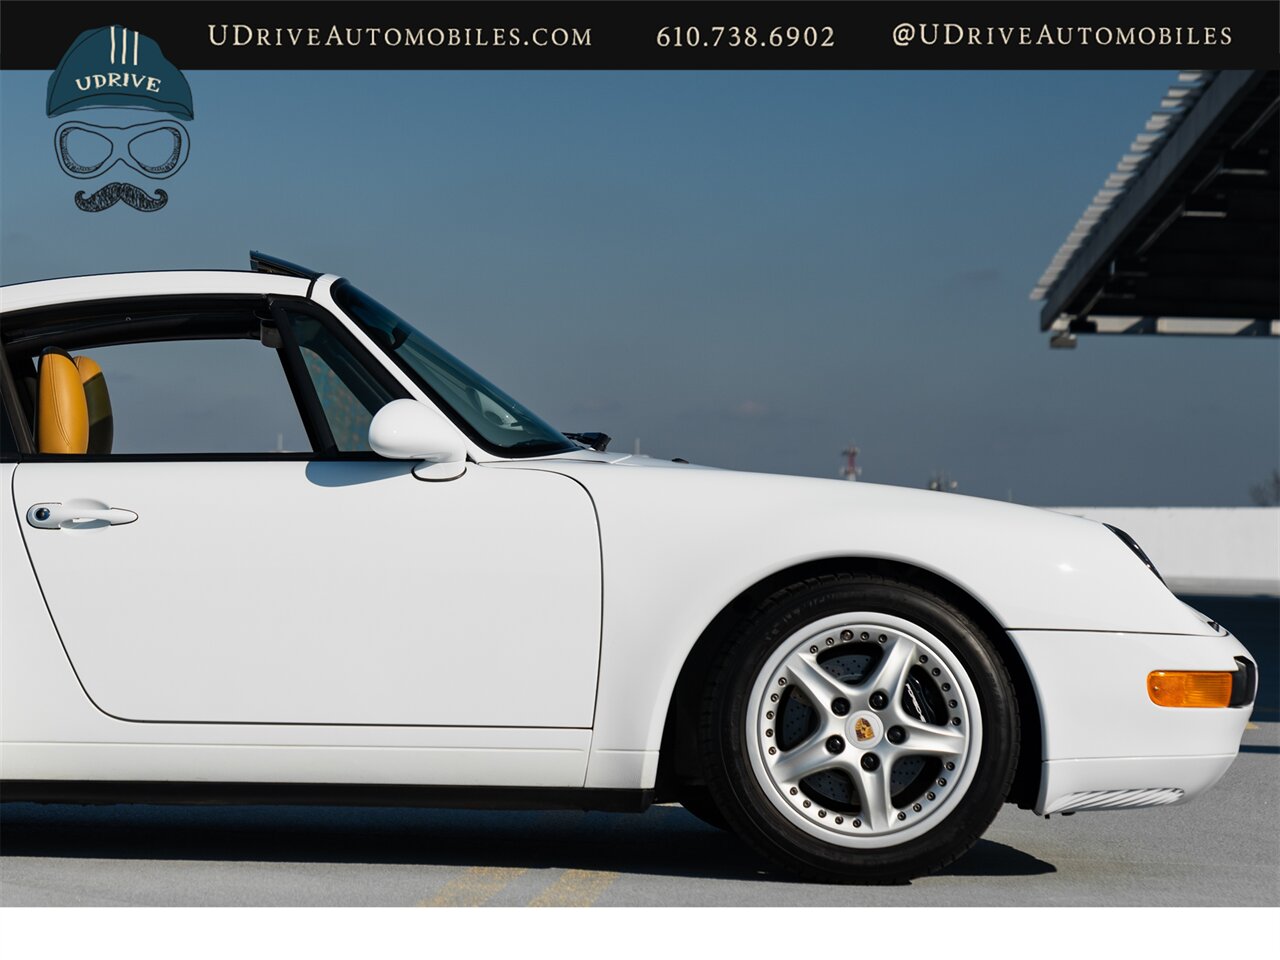 1998 Porsche 911 Carrera 993 Targa  1 of 122 Produced 6 Speed $10k Recent Service Engine Reseal - Photo 16 - West Chester, PA 19382